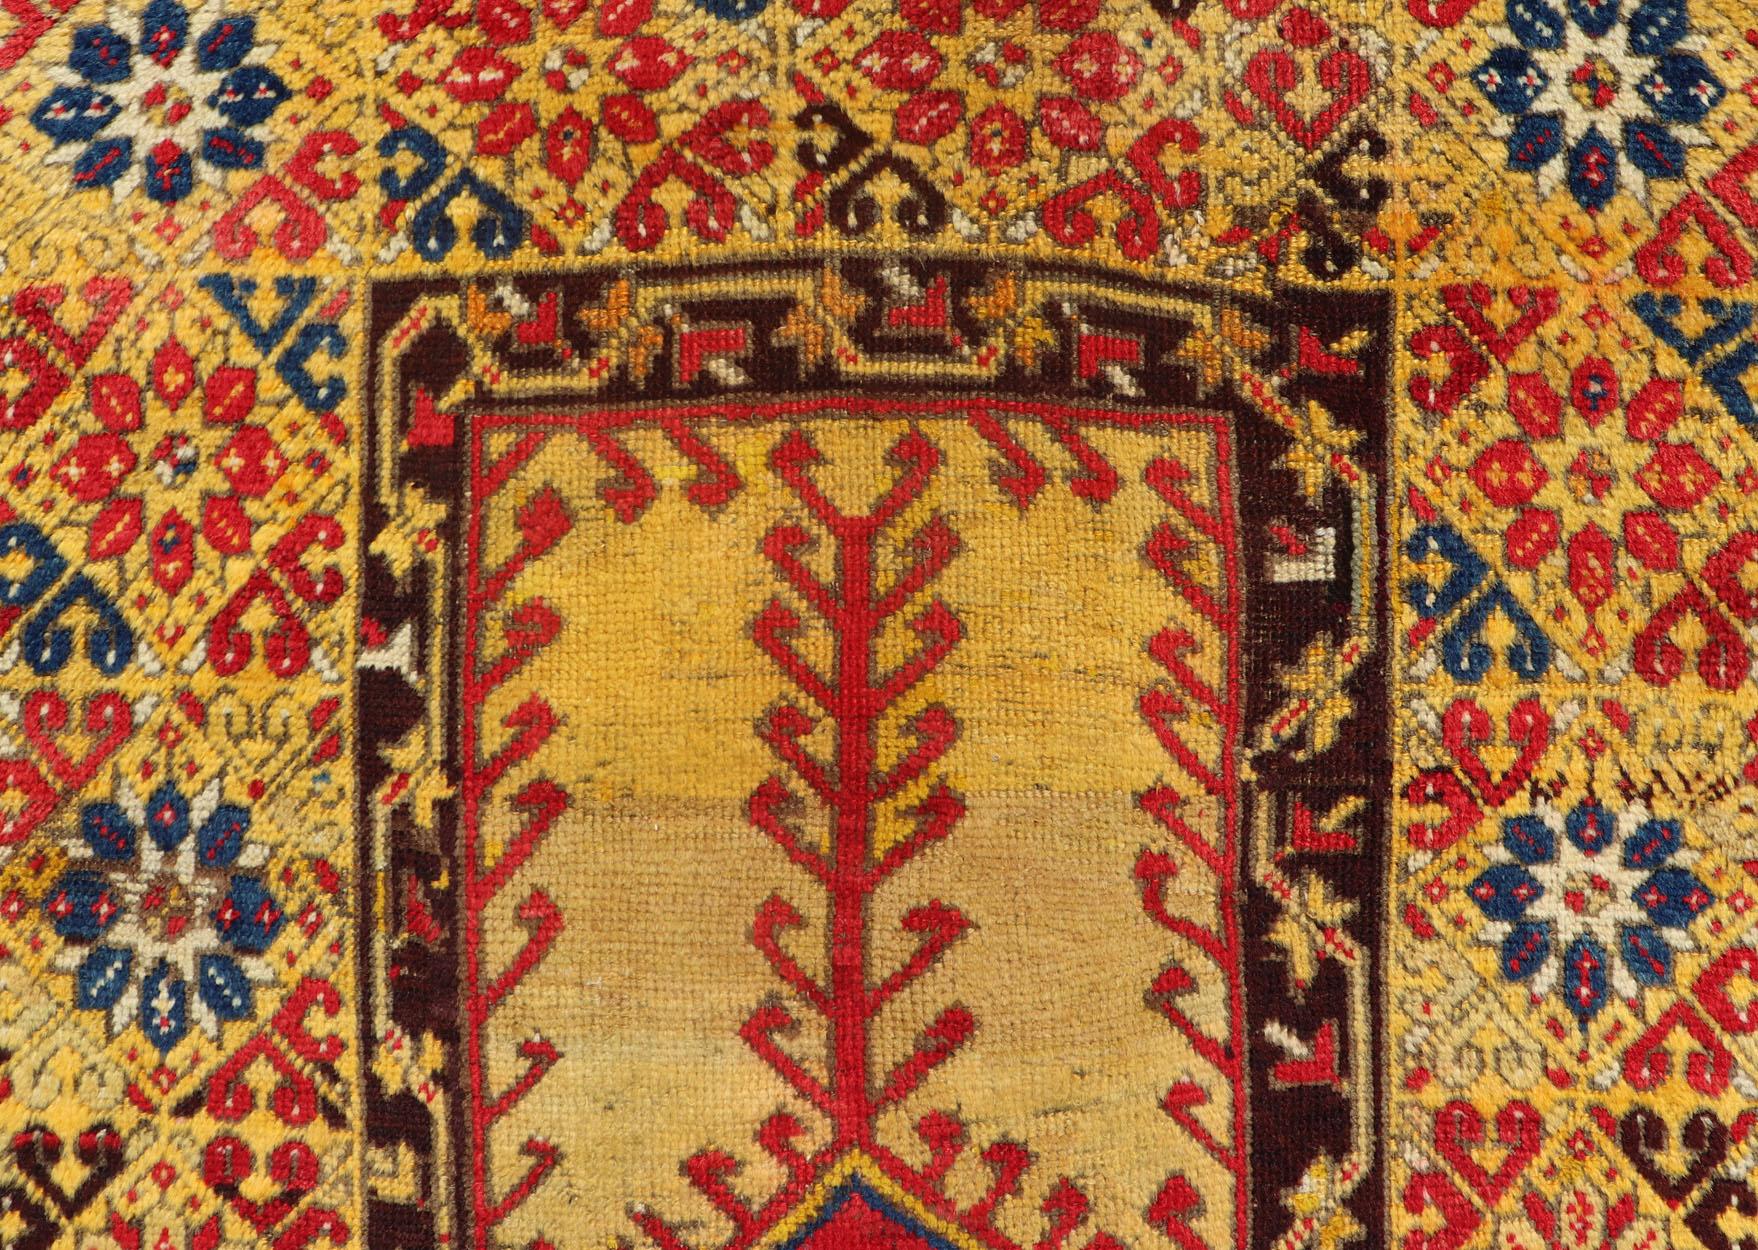 Antique Turkish Prayer Rug in Vibrant Saffron Yellow, Gold, Red and Blue For Sale 2